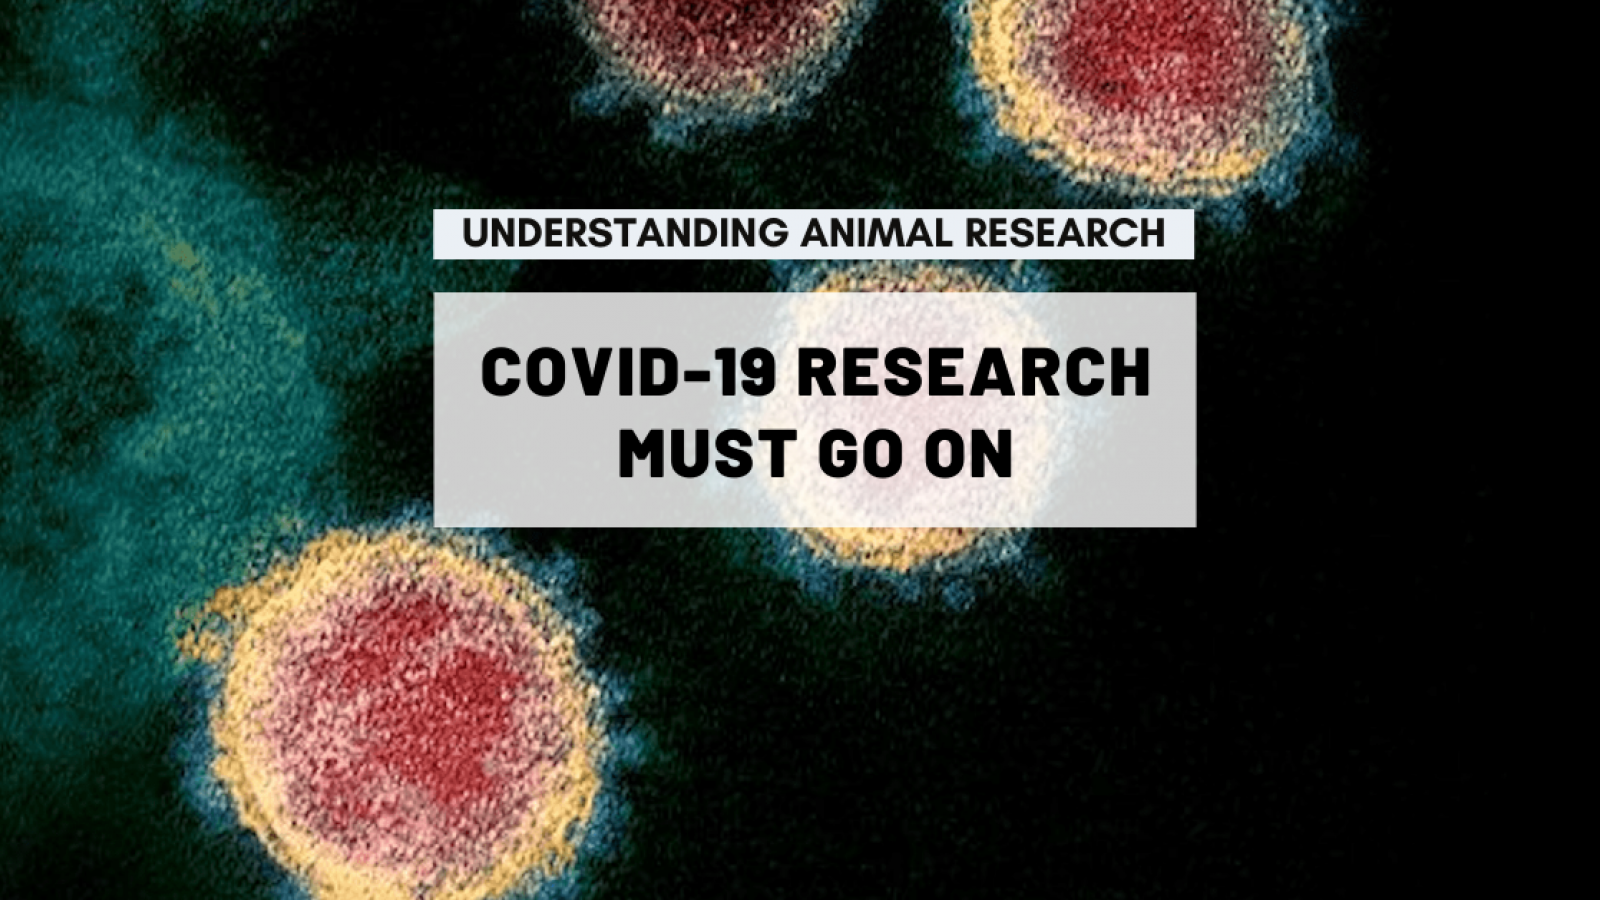 COVID-19 research must go on